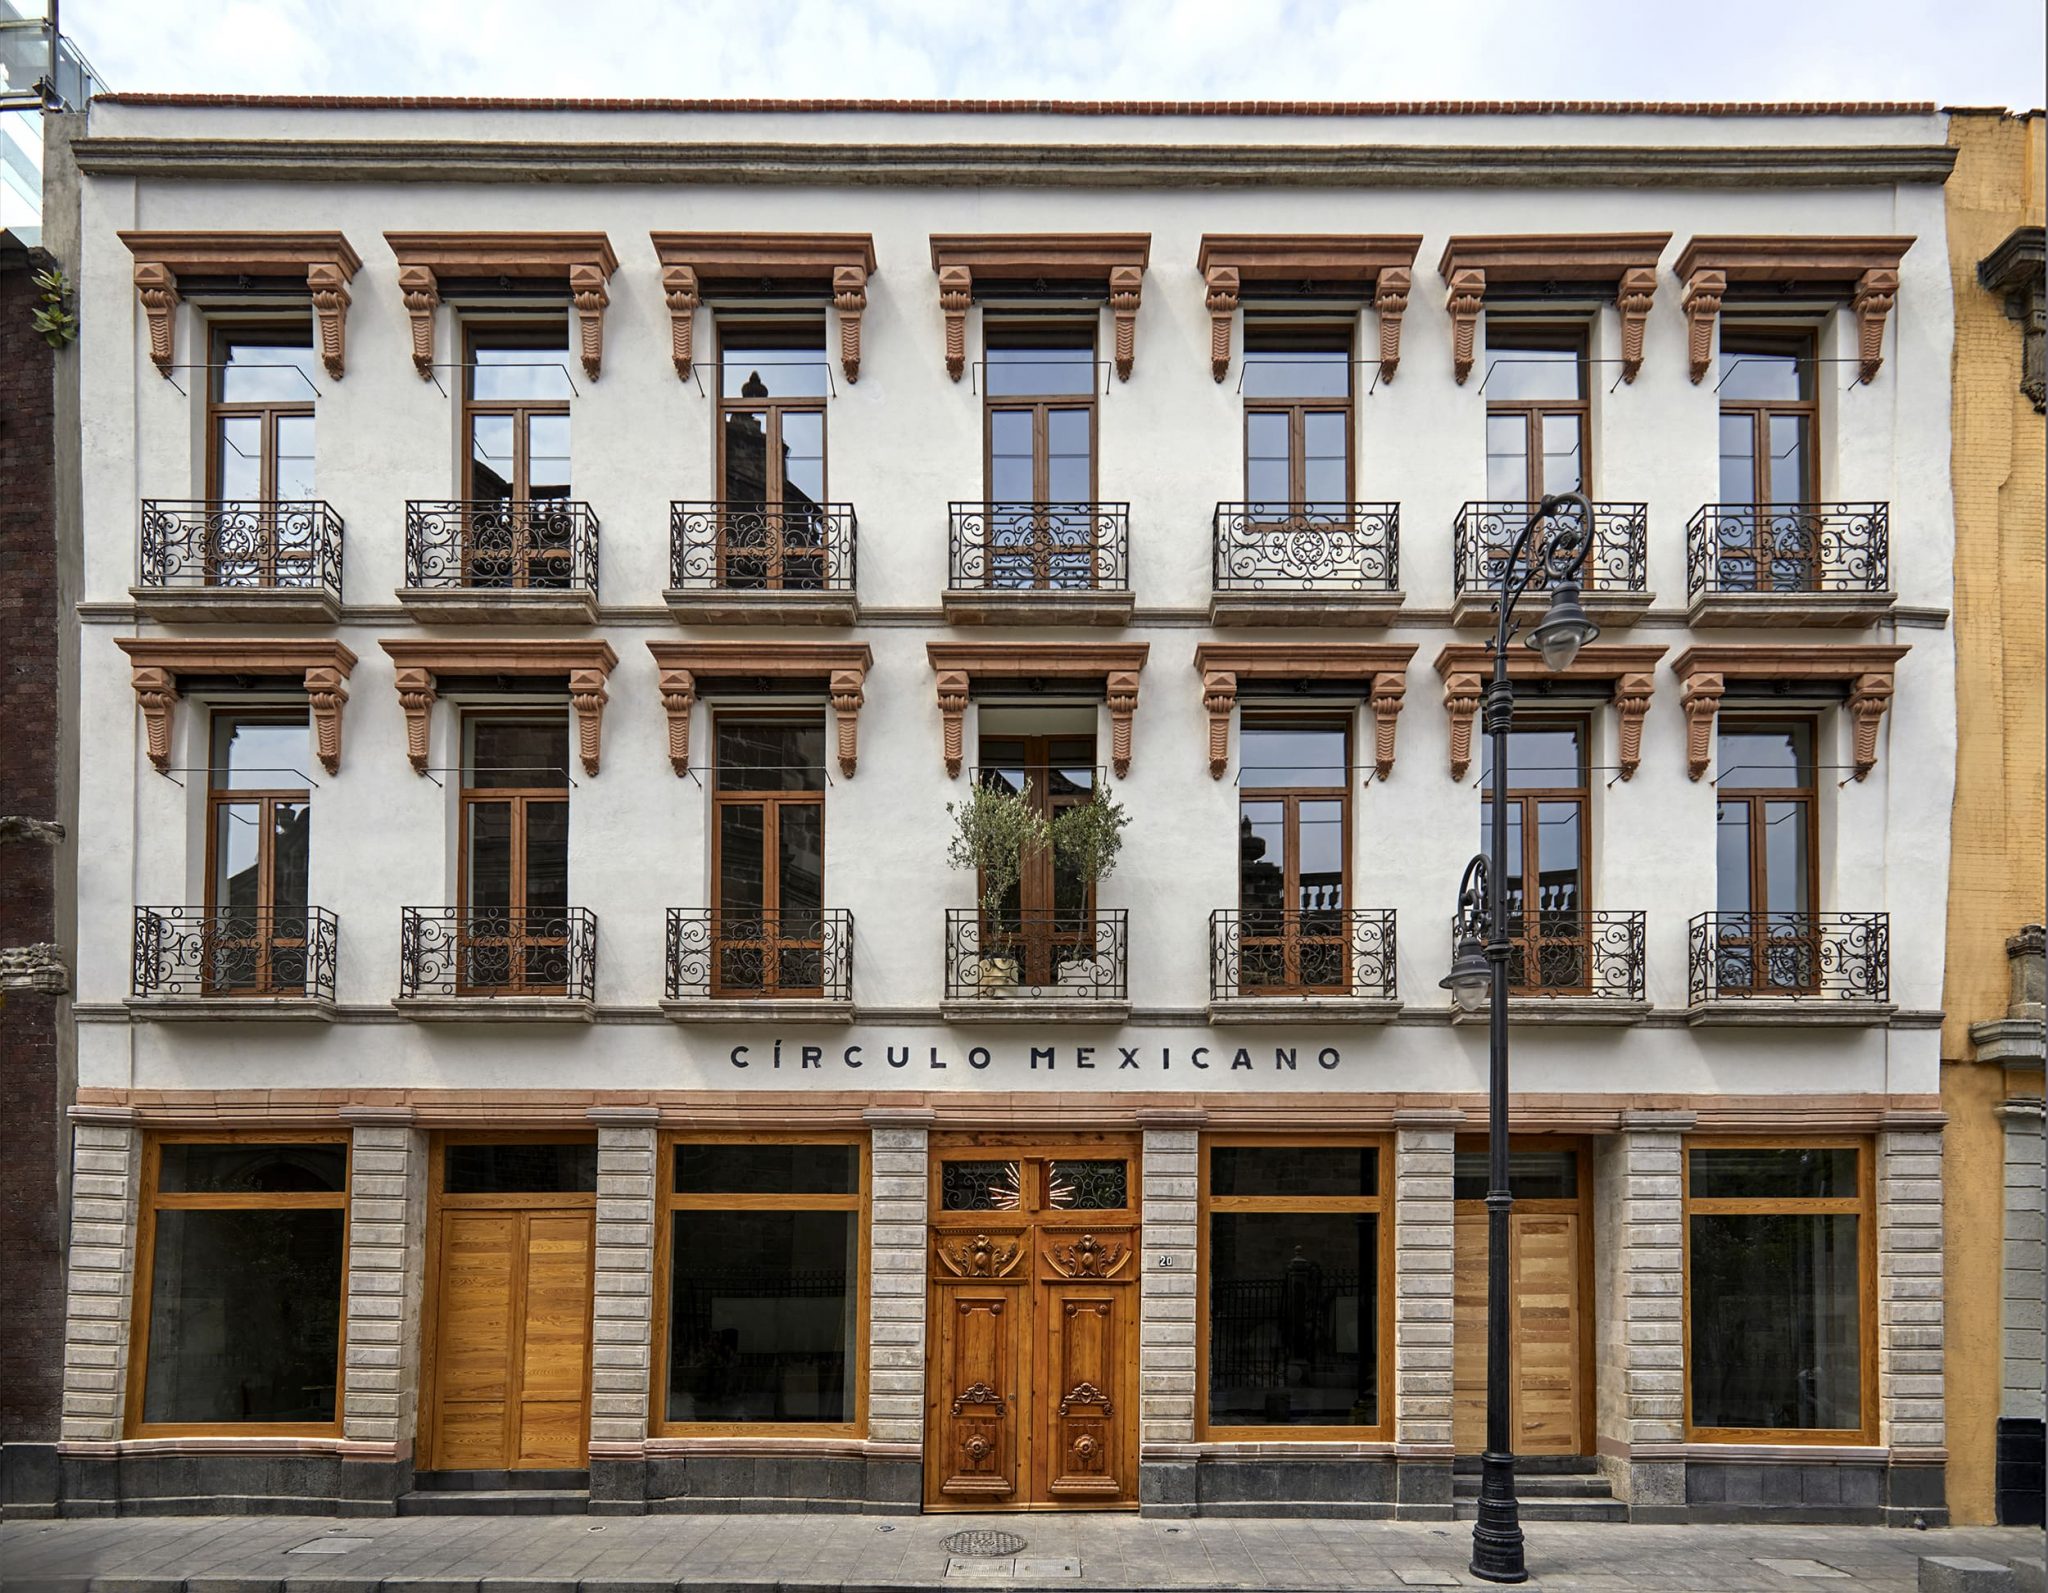 Modern Minimalism + Historical Opulence at Mexico City’s Círculo ...